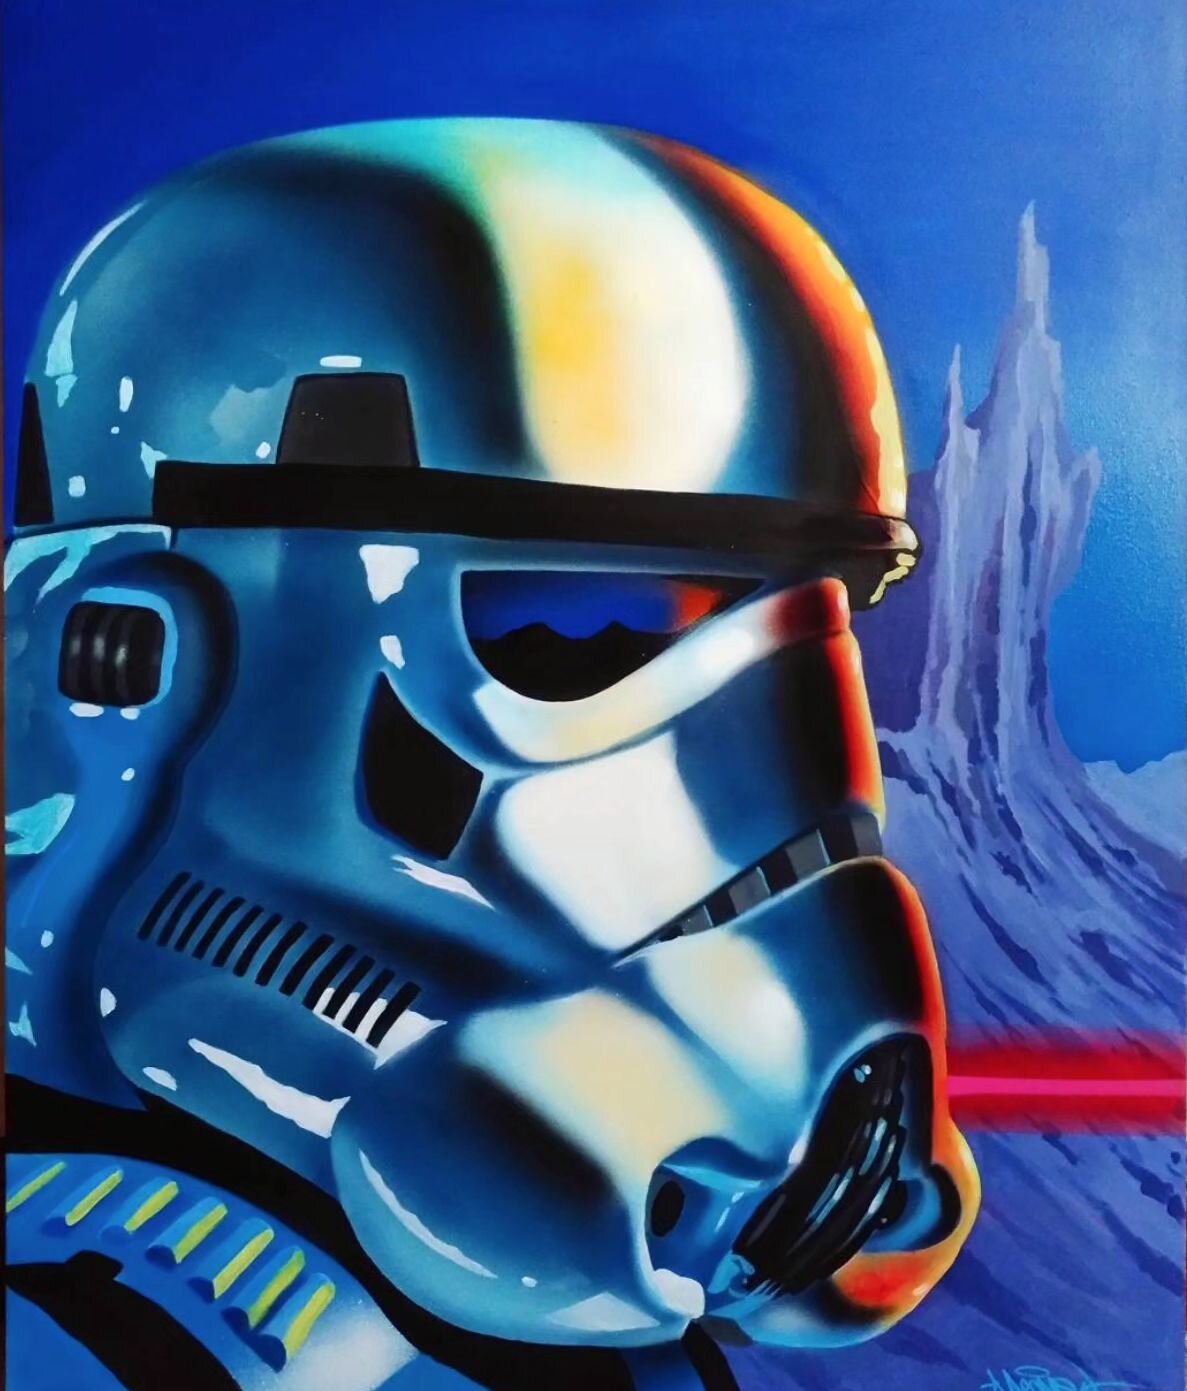 Found a pic of a stormtrooper canvas I did about 5 years ago for @rebel.base.creations 

If you want something commissioned instead of a mural, DM me for details 

#graffiticanvas #scifiart #scifiillustration #starwarsart #stormtrooperhelmet #stormtr